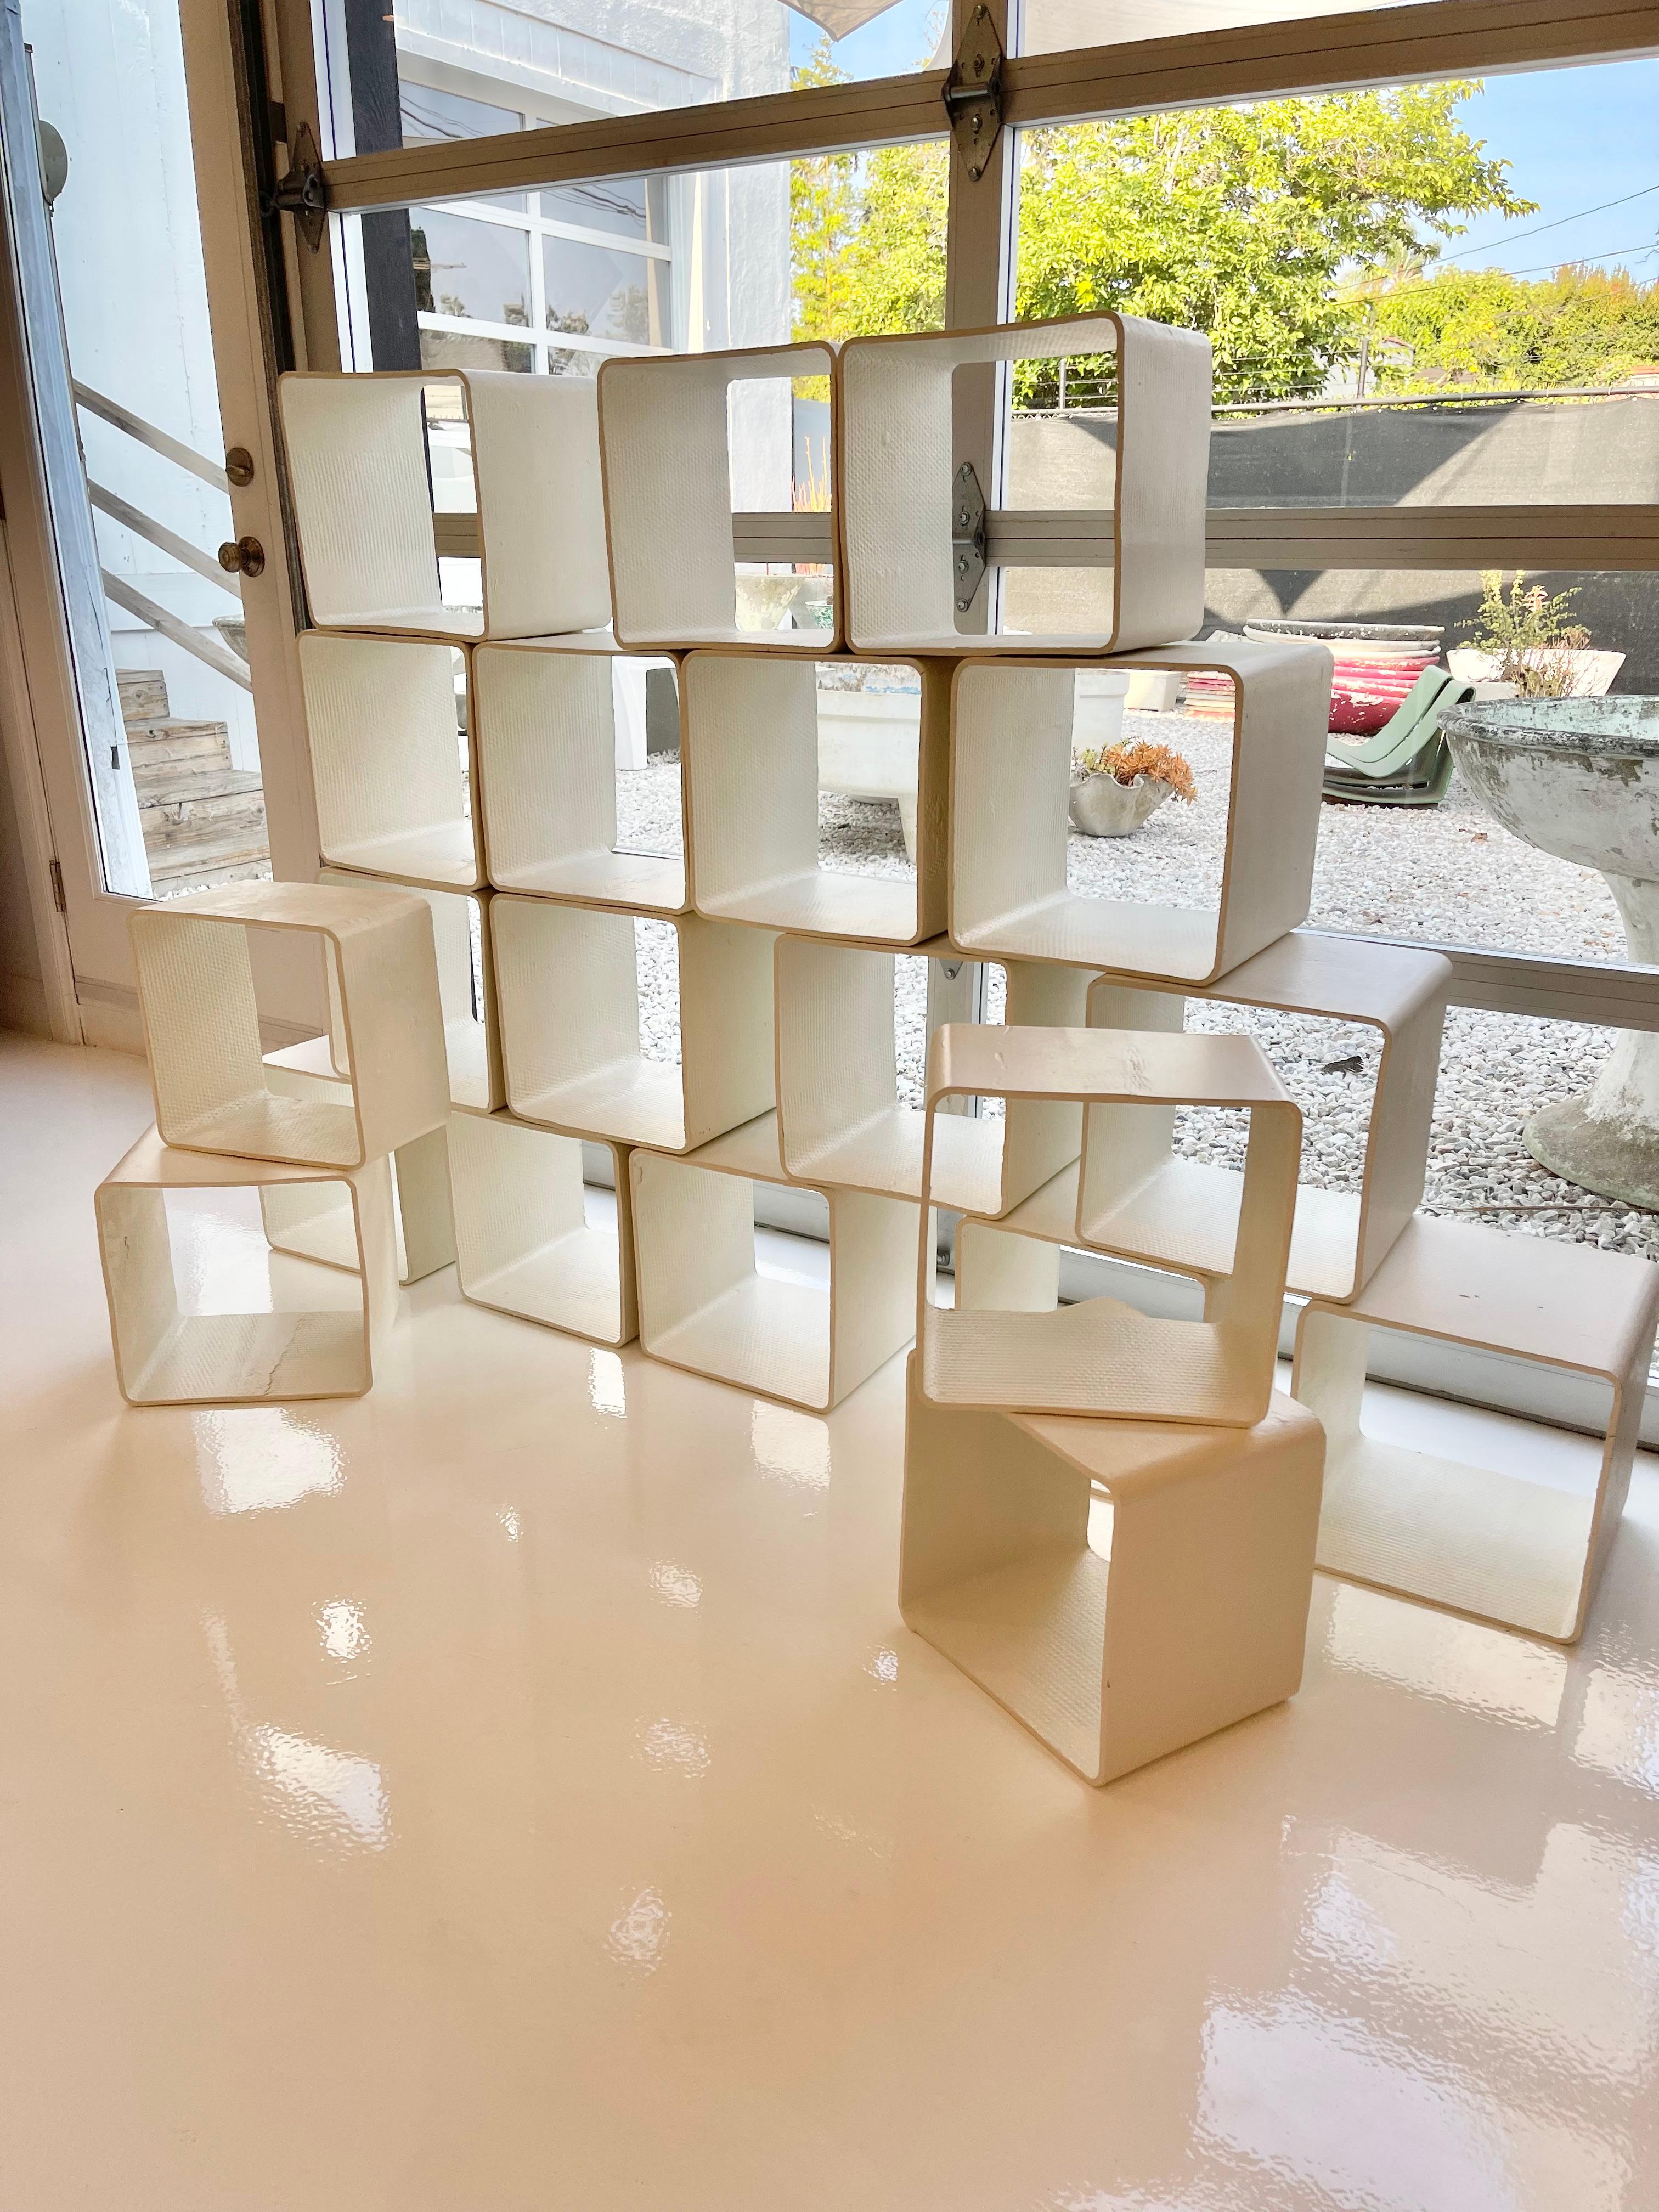 Massive bookcase comprised of 20 concrete cubes by Swiss architect and designer Willy Guhl, handmade in the early 1960s in Switzerland. Produced by Eternit. Set of 20 cubes in great original condition. Can be arranged in a multitude of ways. Perfect